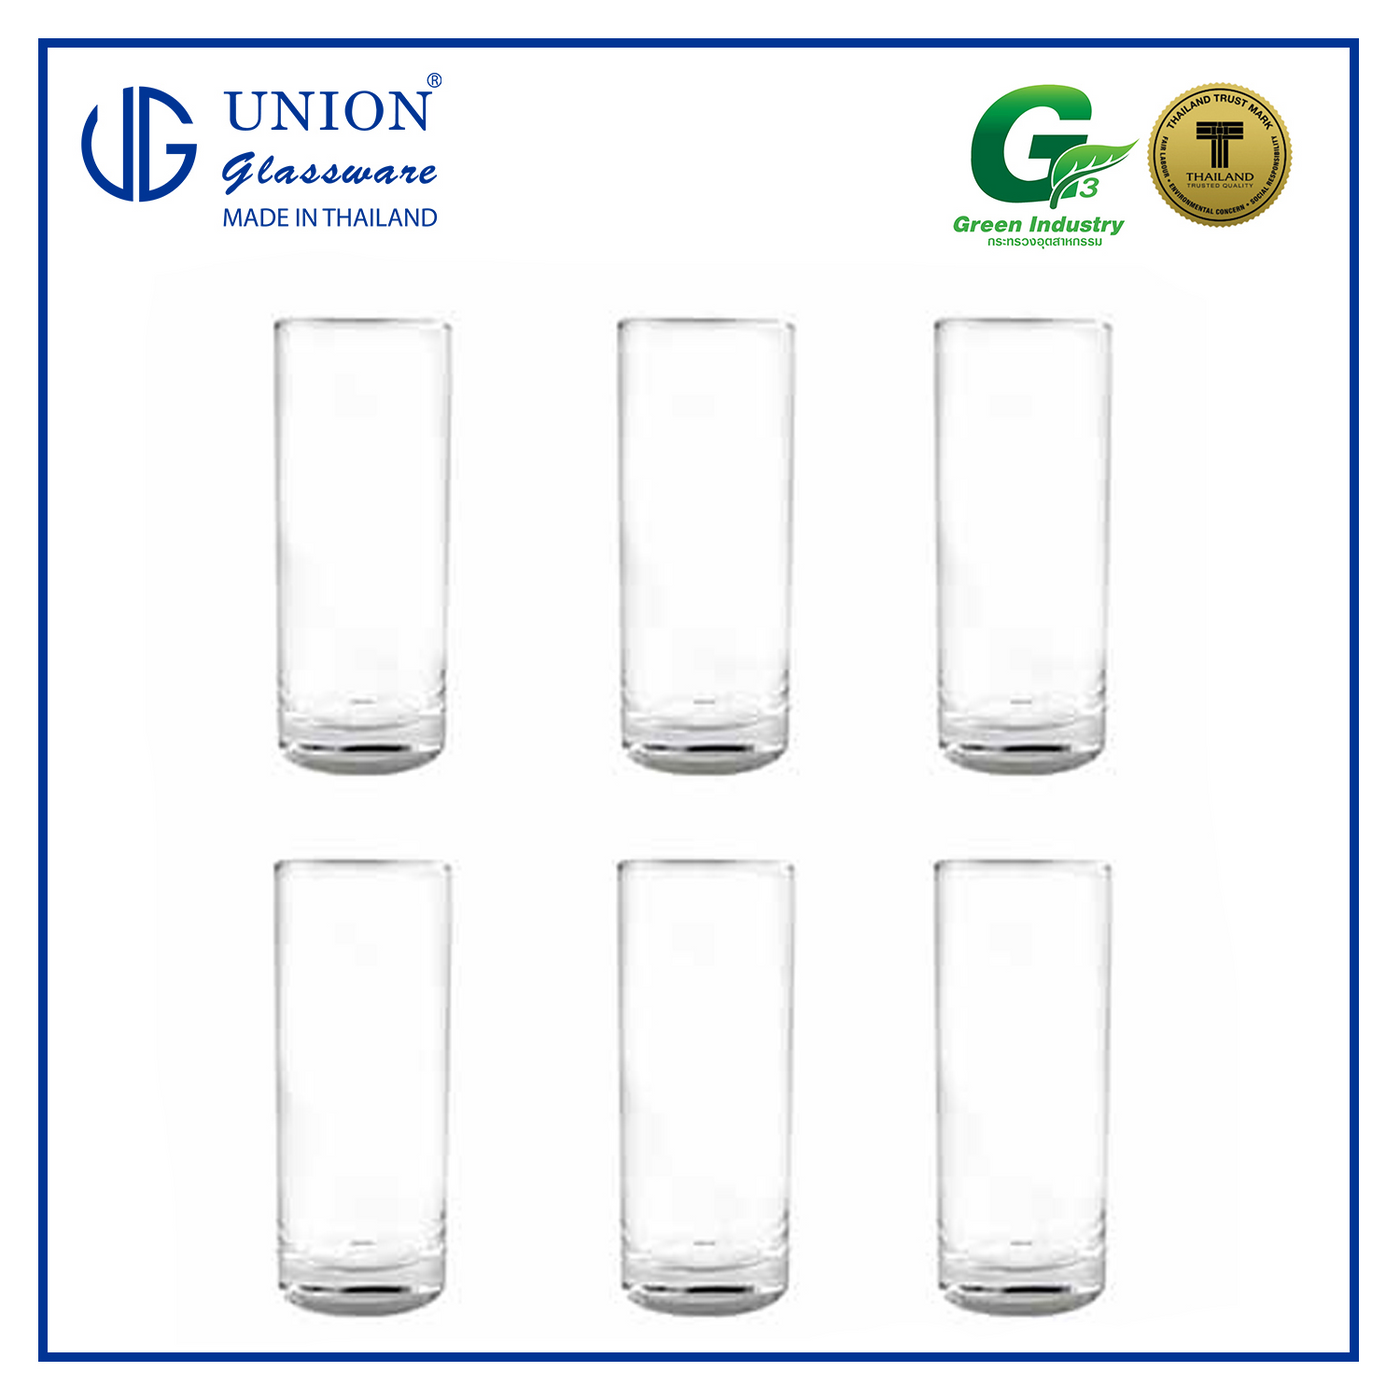 UNION GLASS Thailand Premium Clear Glass Highball Water, Juice, Soda, Liquor Glass 260 ml | 9 oz Set of 6 Amazing Gift Idea For Any Occasion!